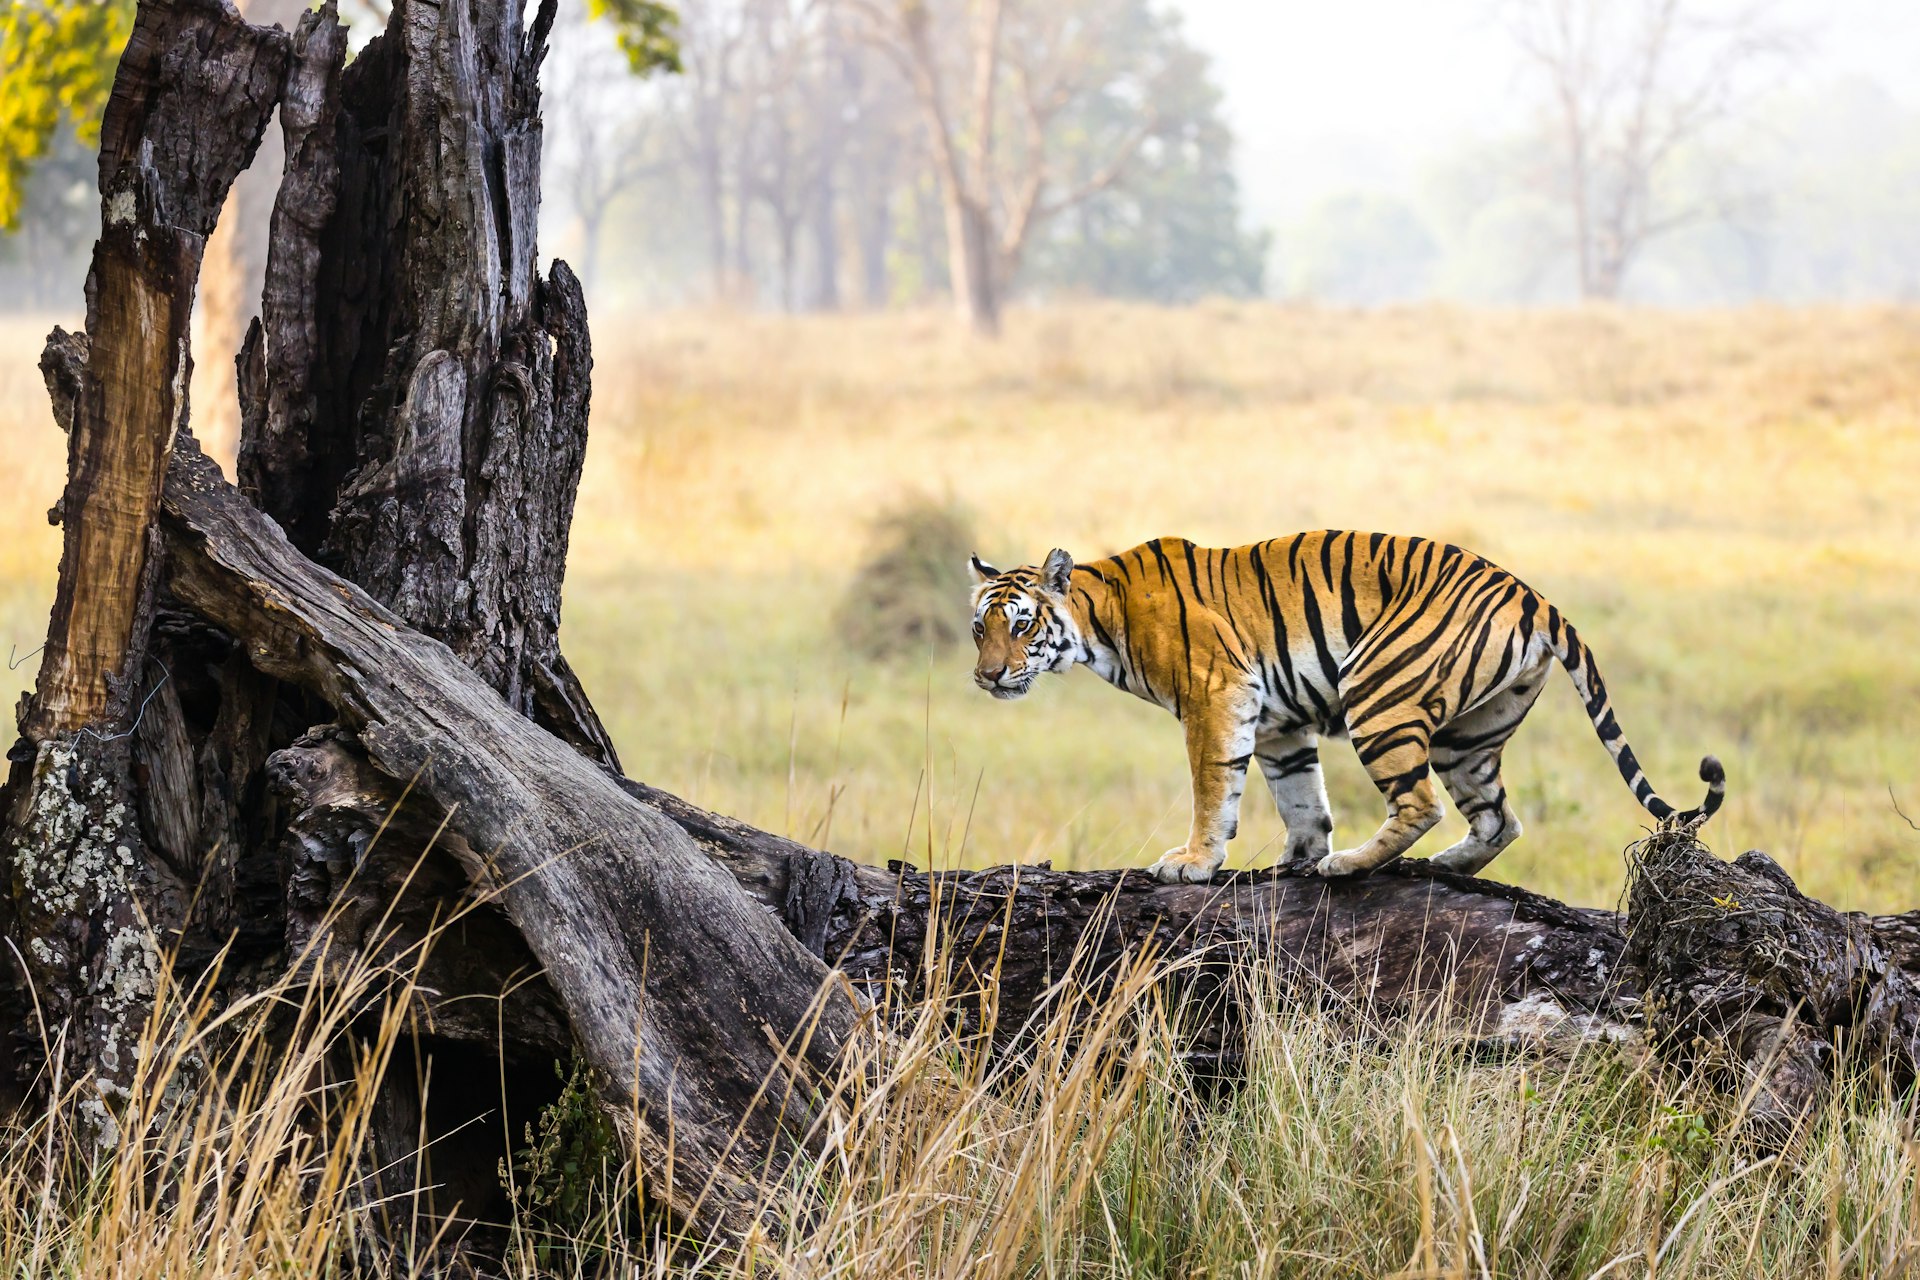 An adult Bengal tiger, 11-year old female named Neelam, on the top of a fallen tree trunk at Kanha Tiger Reserve, Madhya Pradesh, India